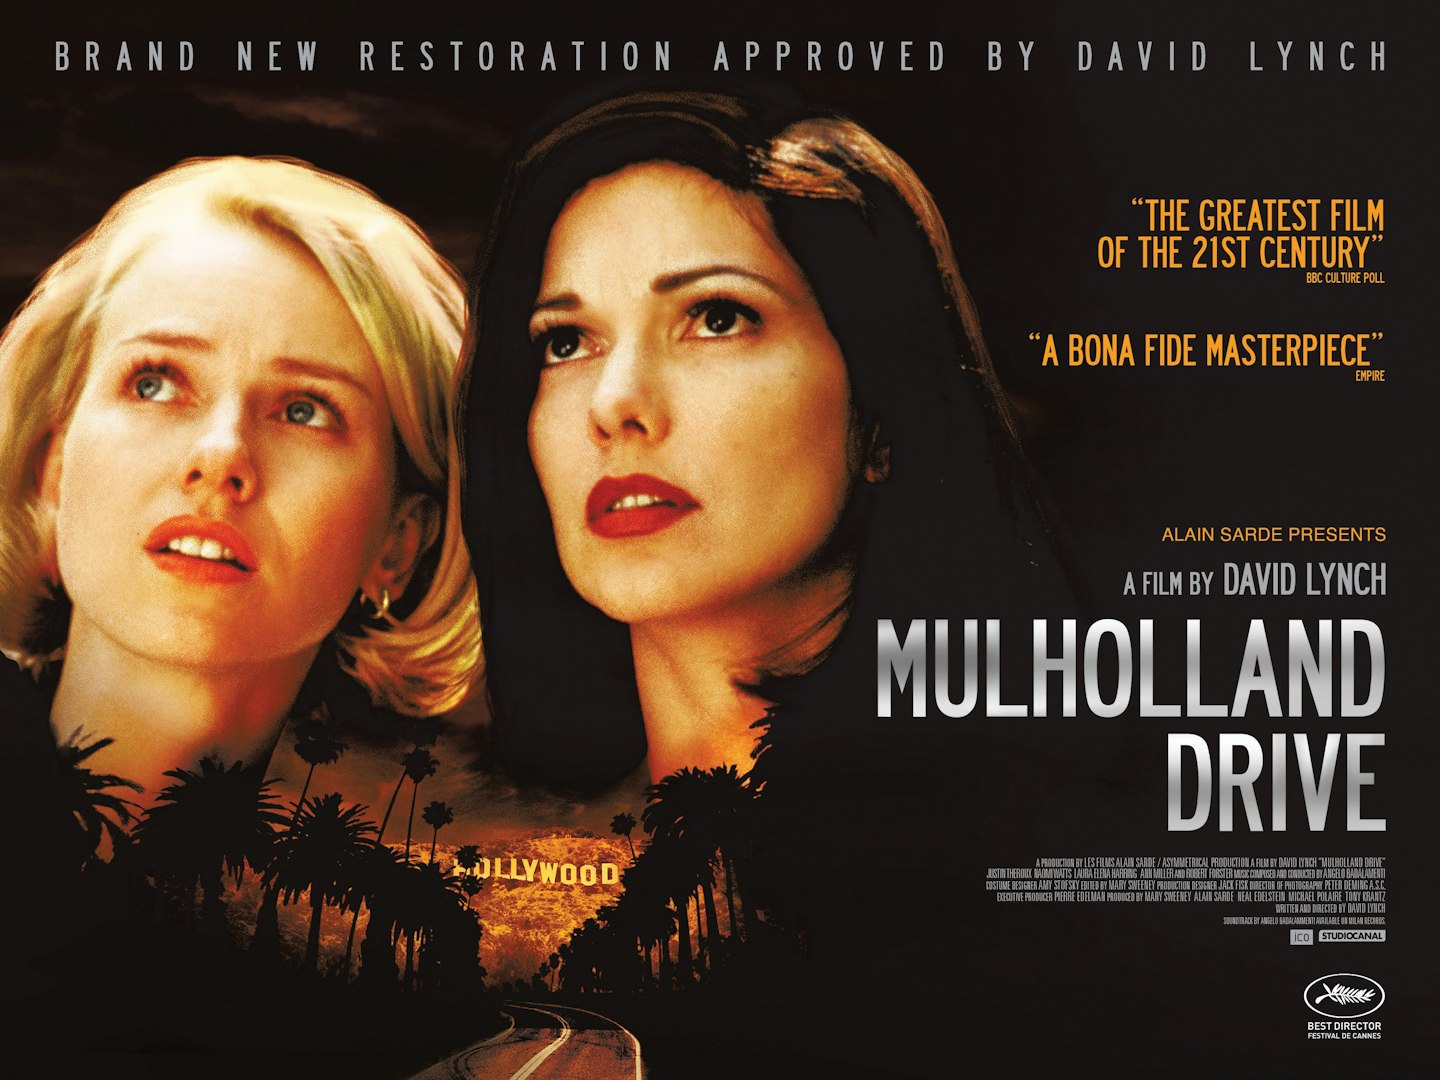 Mulholland Drive re-release poster